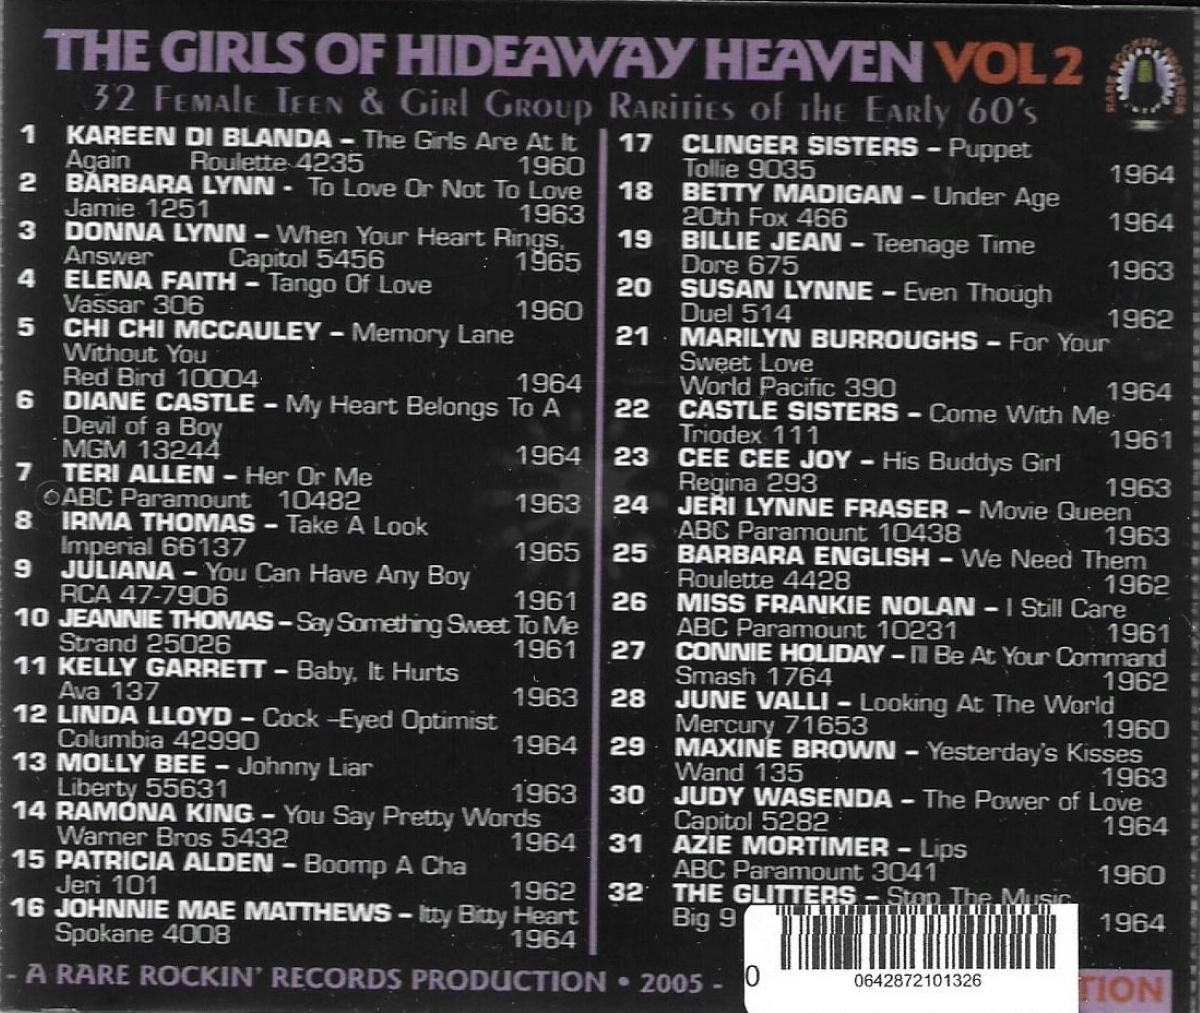 The Girls Of Hideaway Heaven, Vol. 2: The Girls Are At It Again